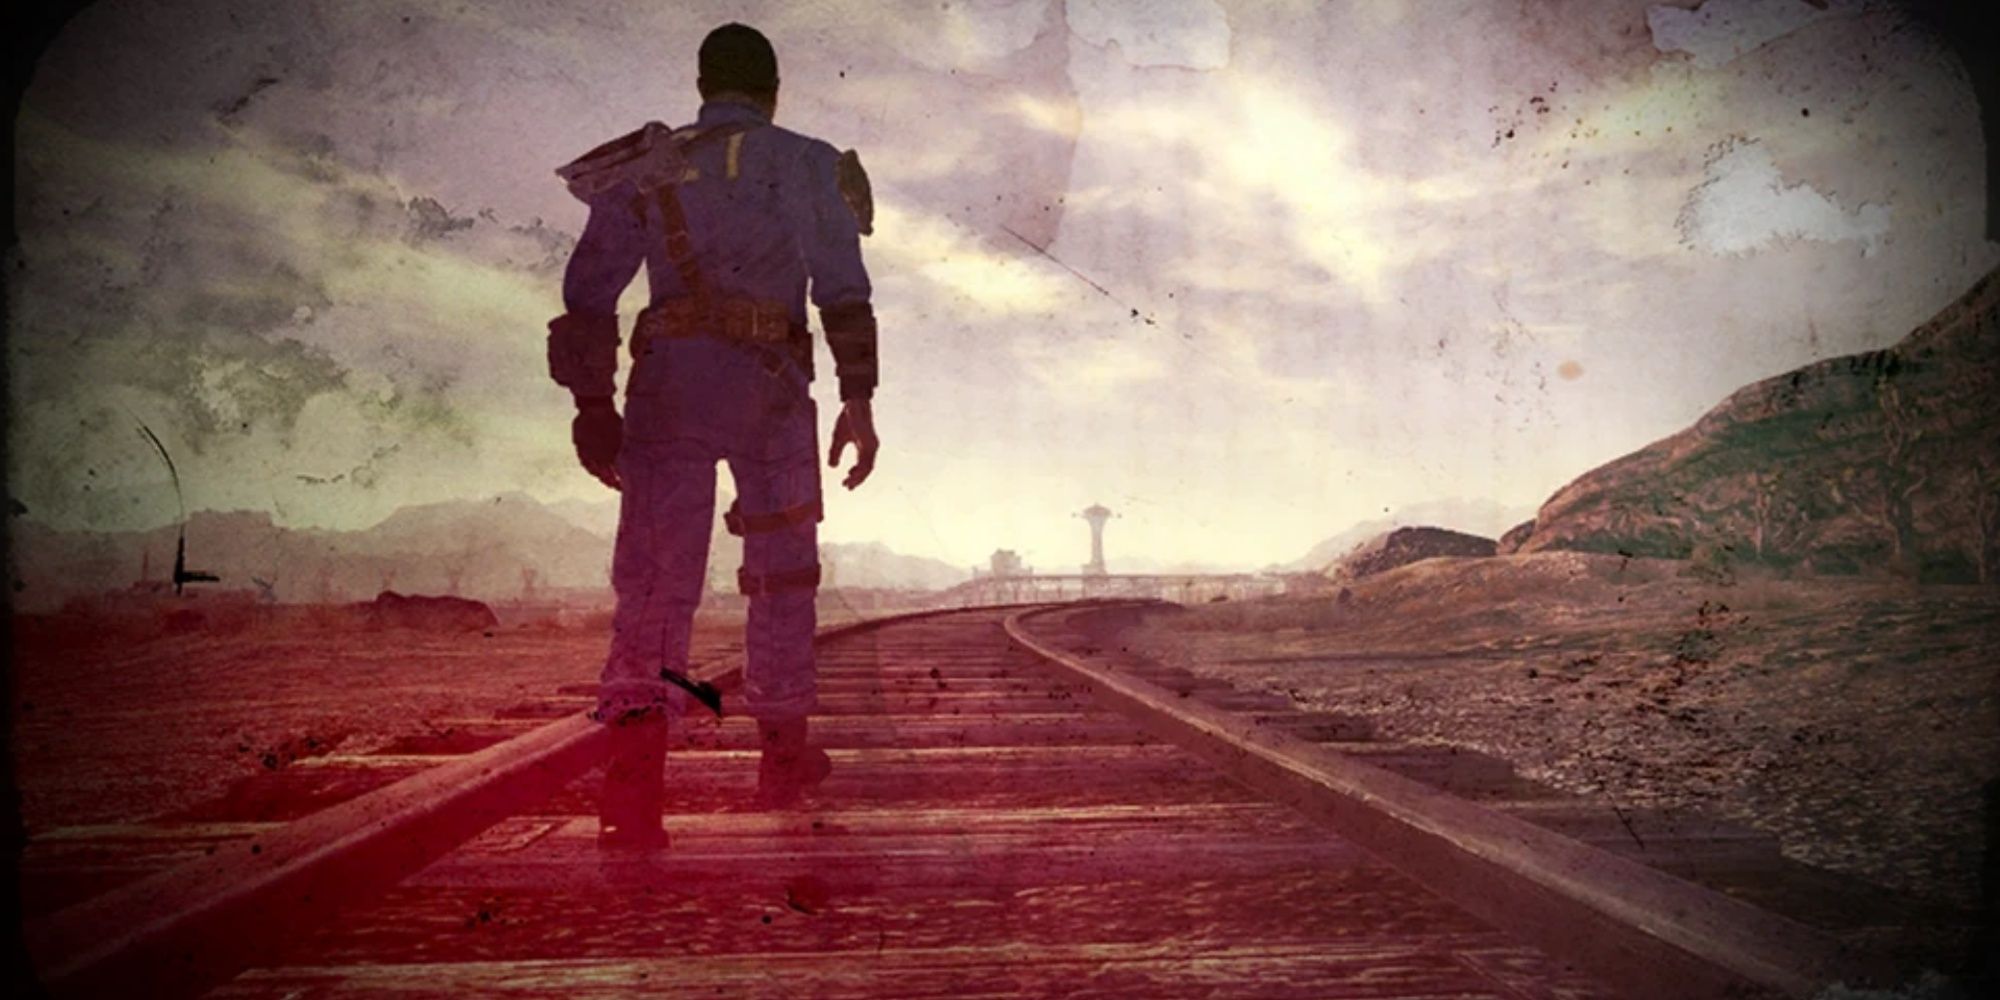 An ending slide from Fallout New Vegas, depicting The Courier walking along railroad tracks.